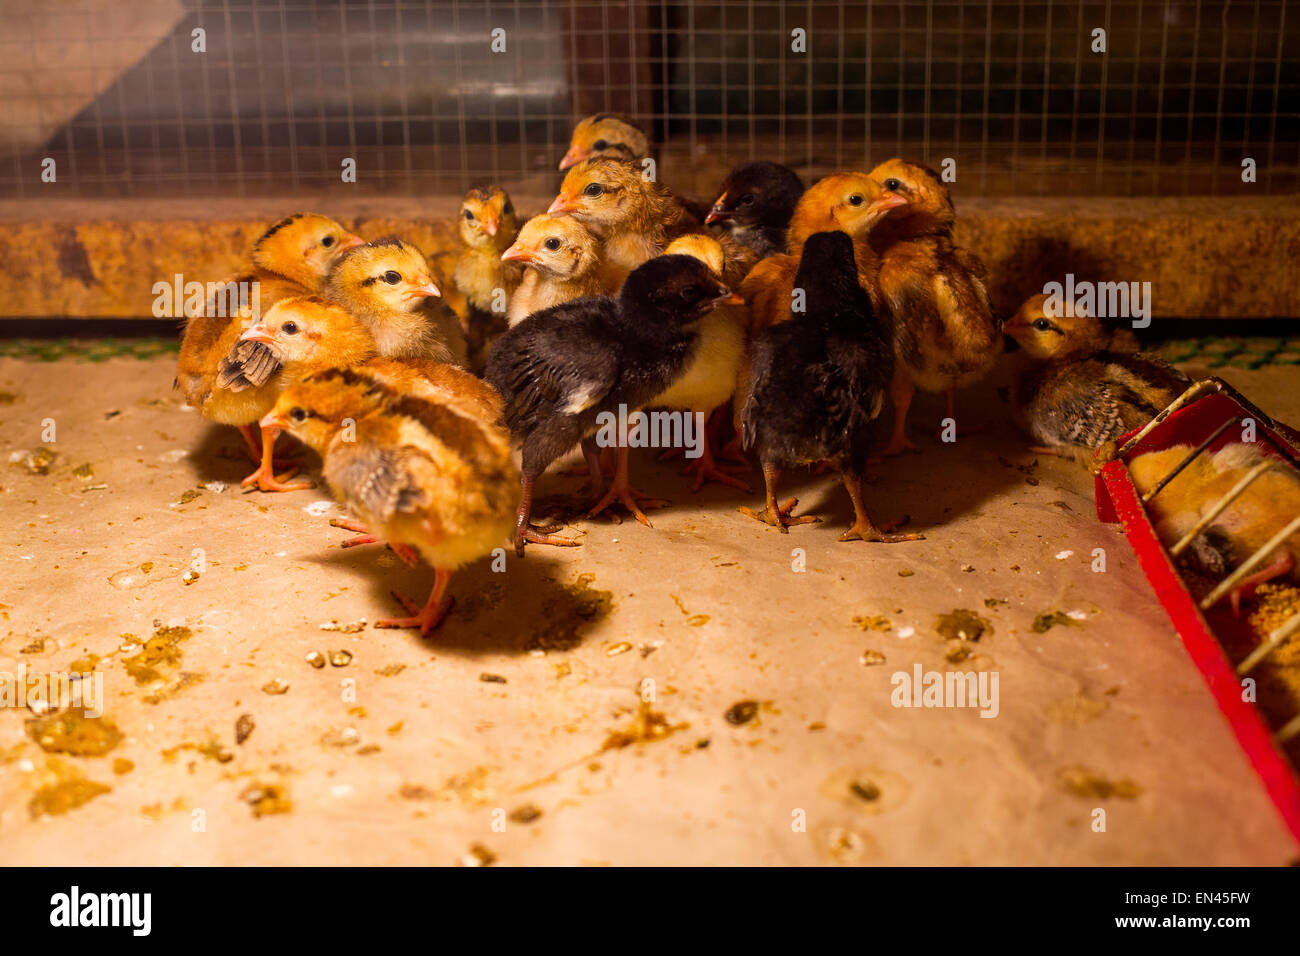 Chicks fill the coop in the city of Famy, province of Laguna, Philippines on 25 December 2014. Stock Photo